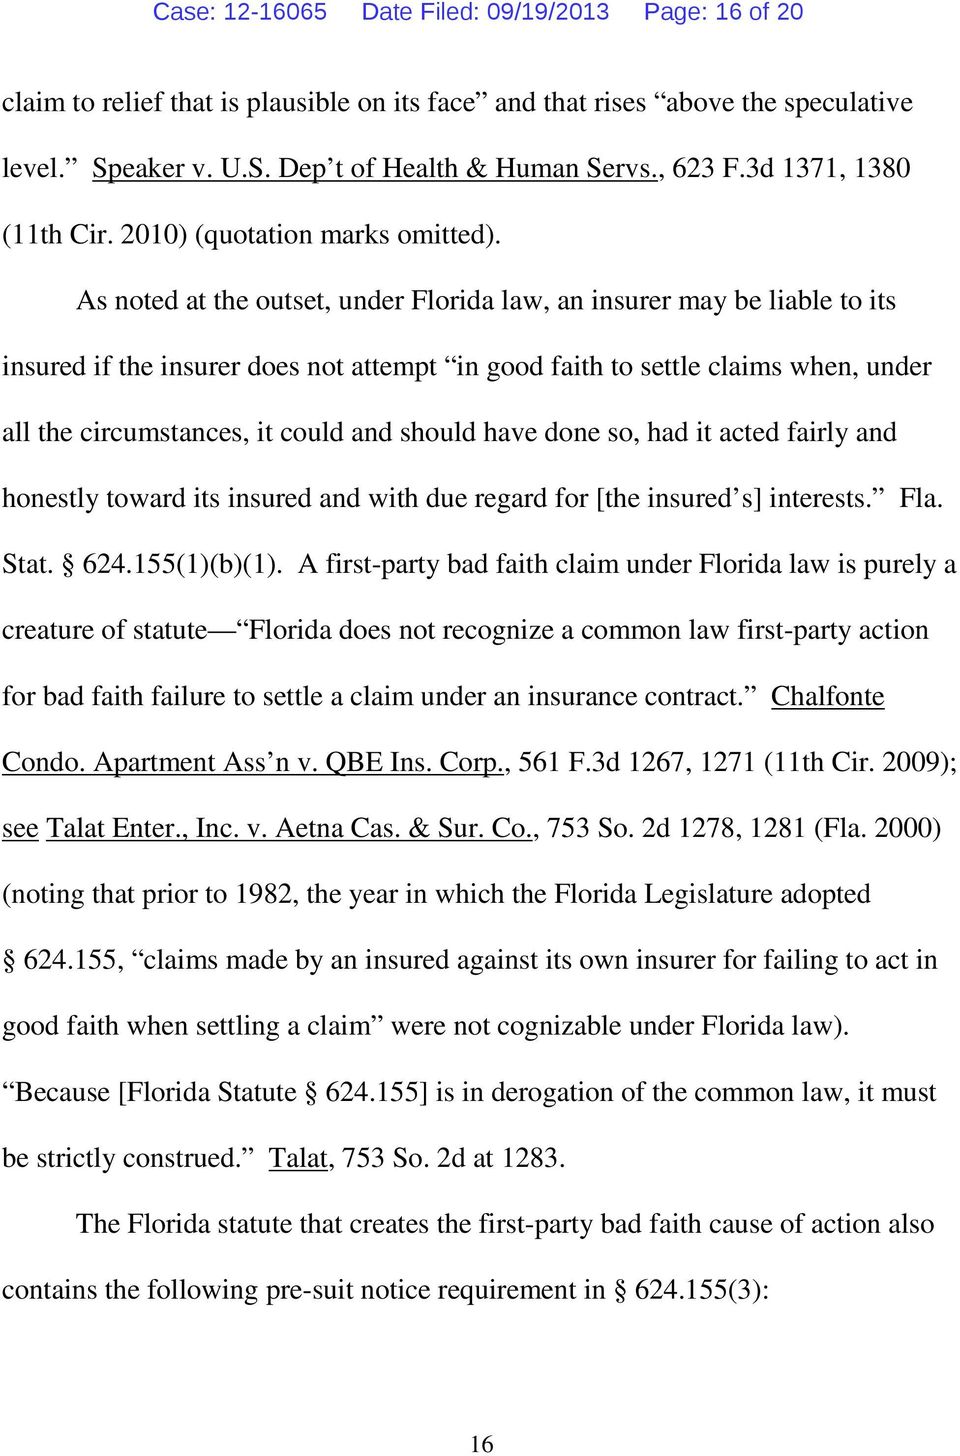 As noted at the outset, under Florida law, an insurer may be liable to its insured if the insurer does not attempt in good faith to settle claims when, under all the circumstances, it could and